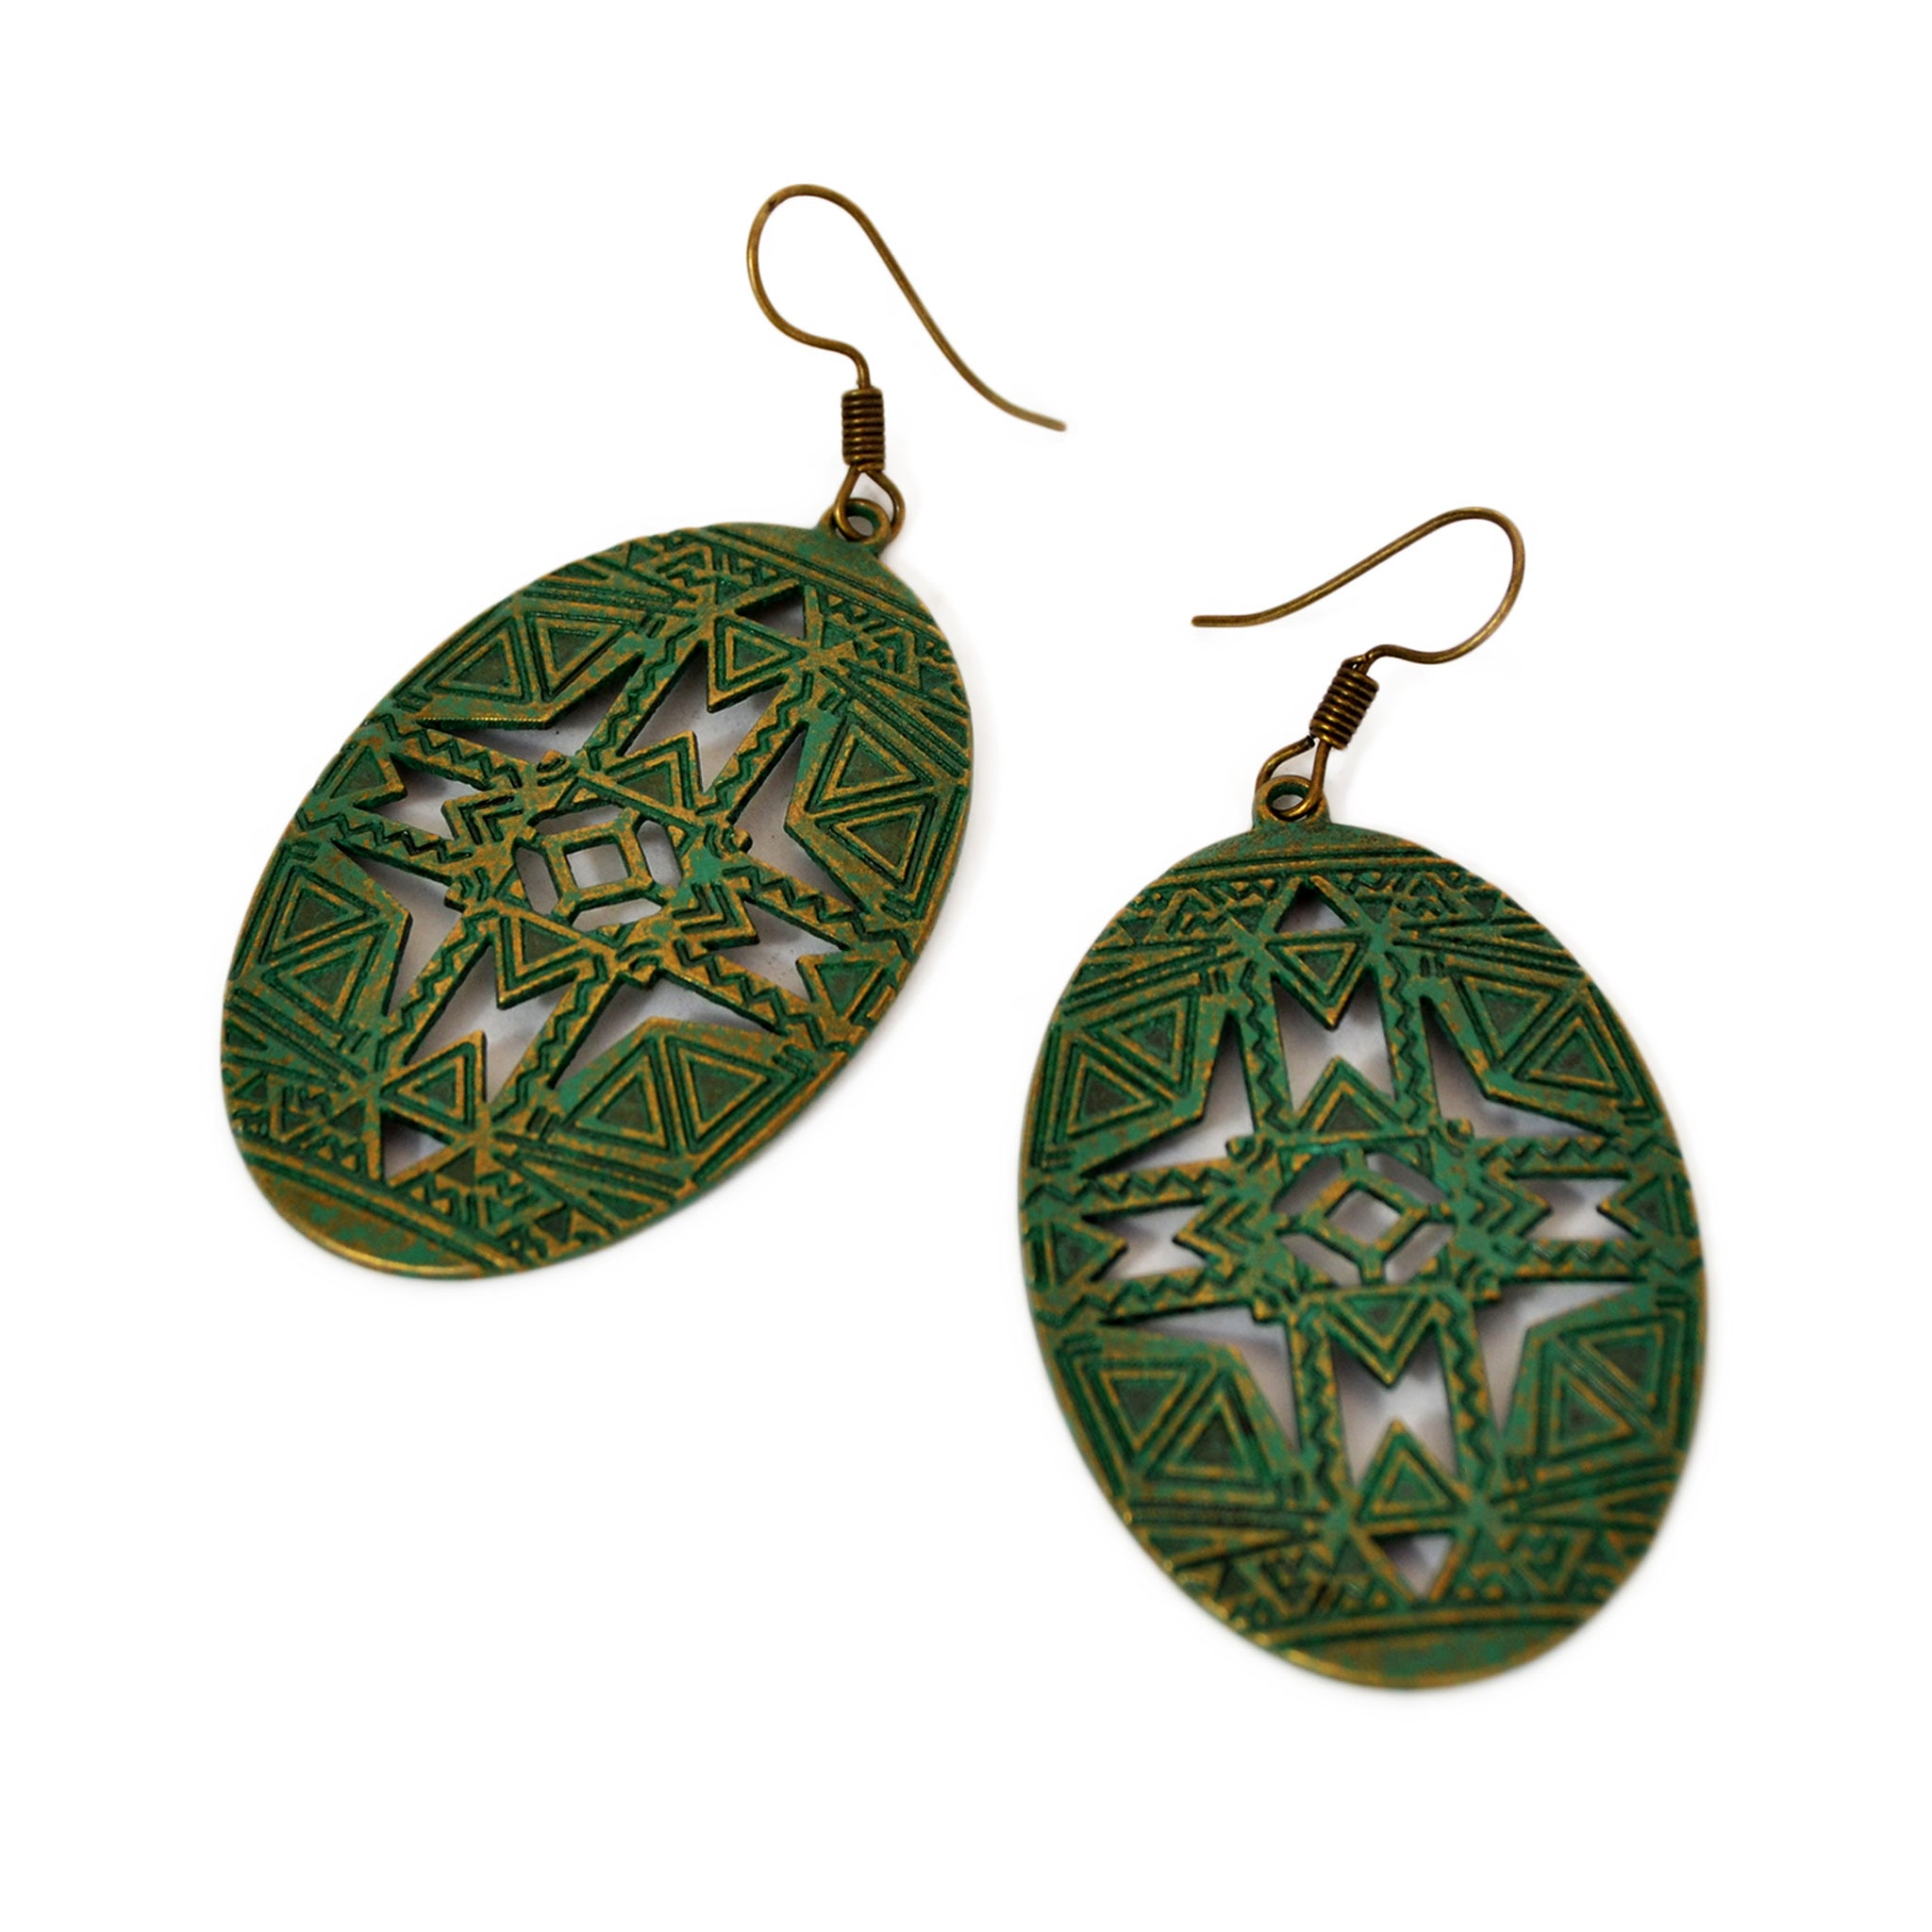 Oval earrings with old turquoise green patina and geometric carved design